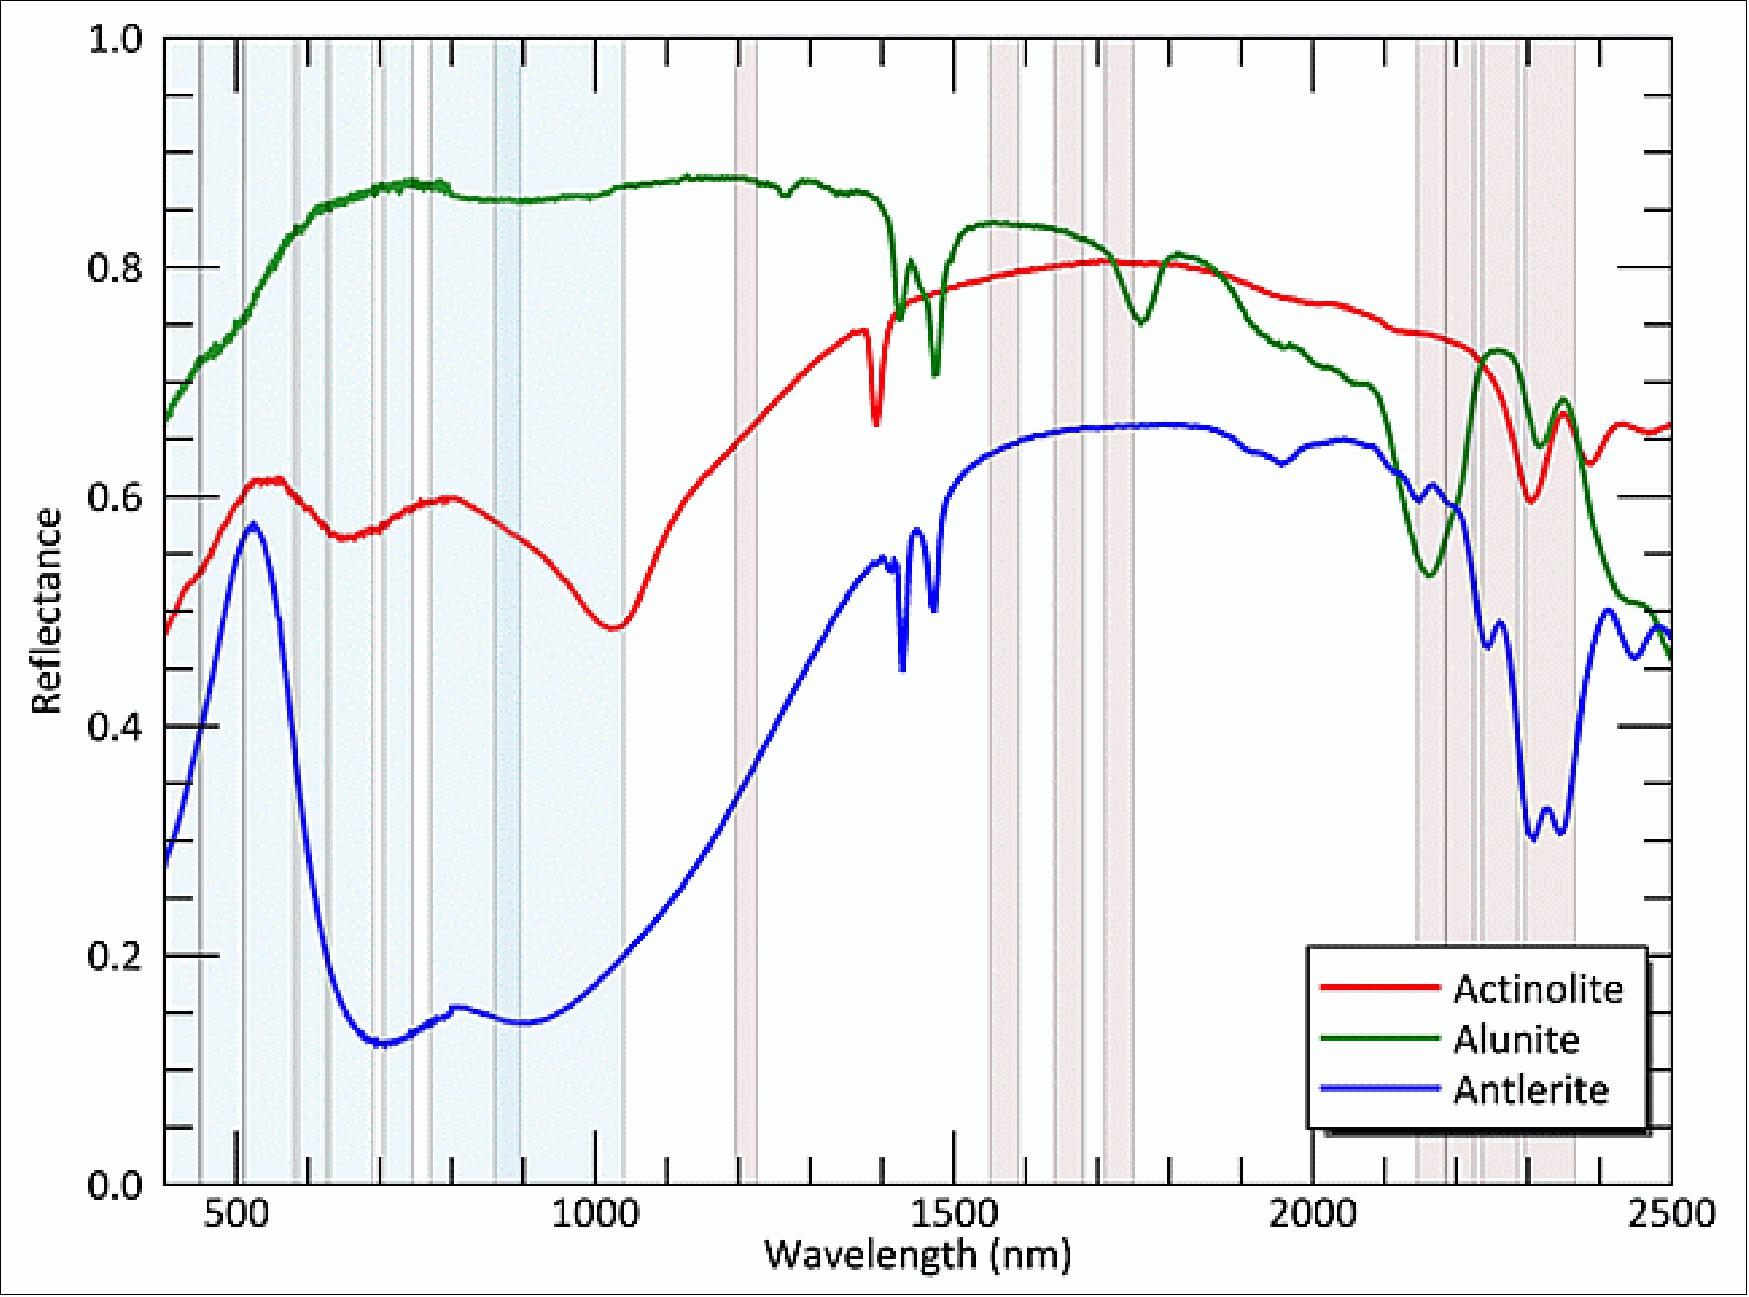 Figure 23: Reference spectra of three minerals (image credit: Exelis)